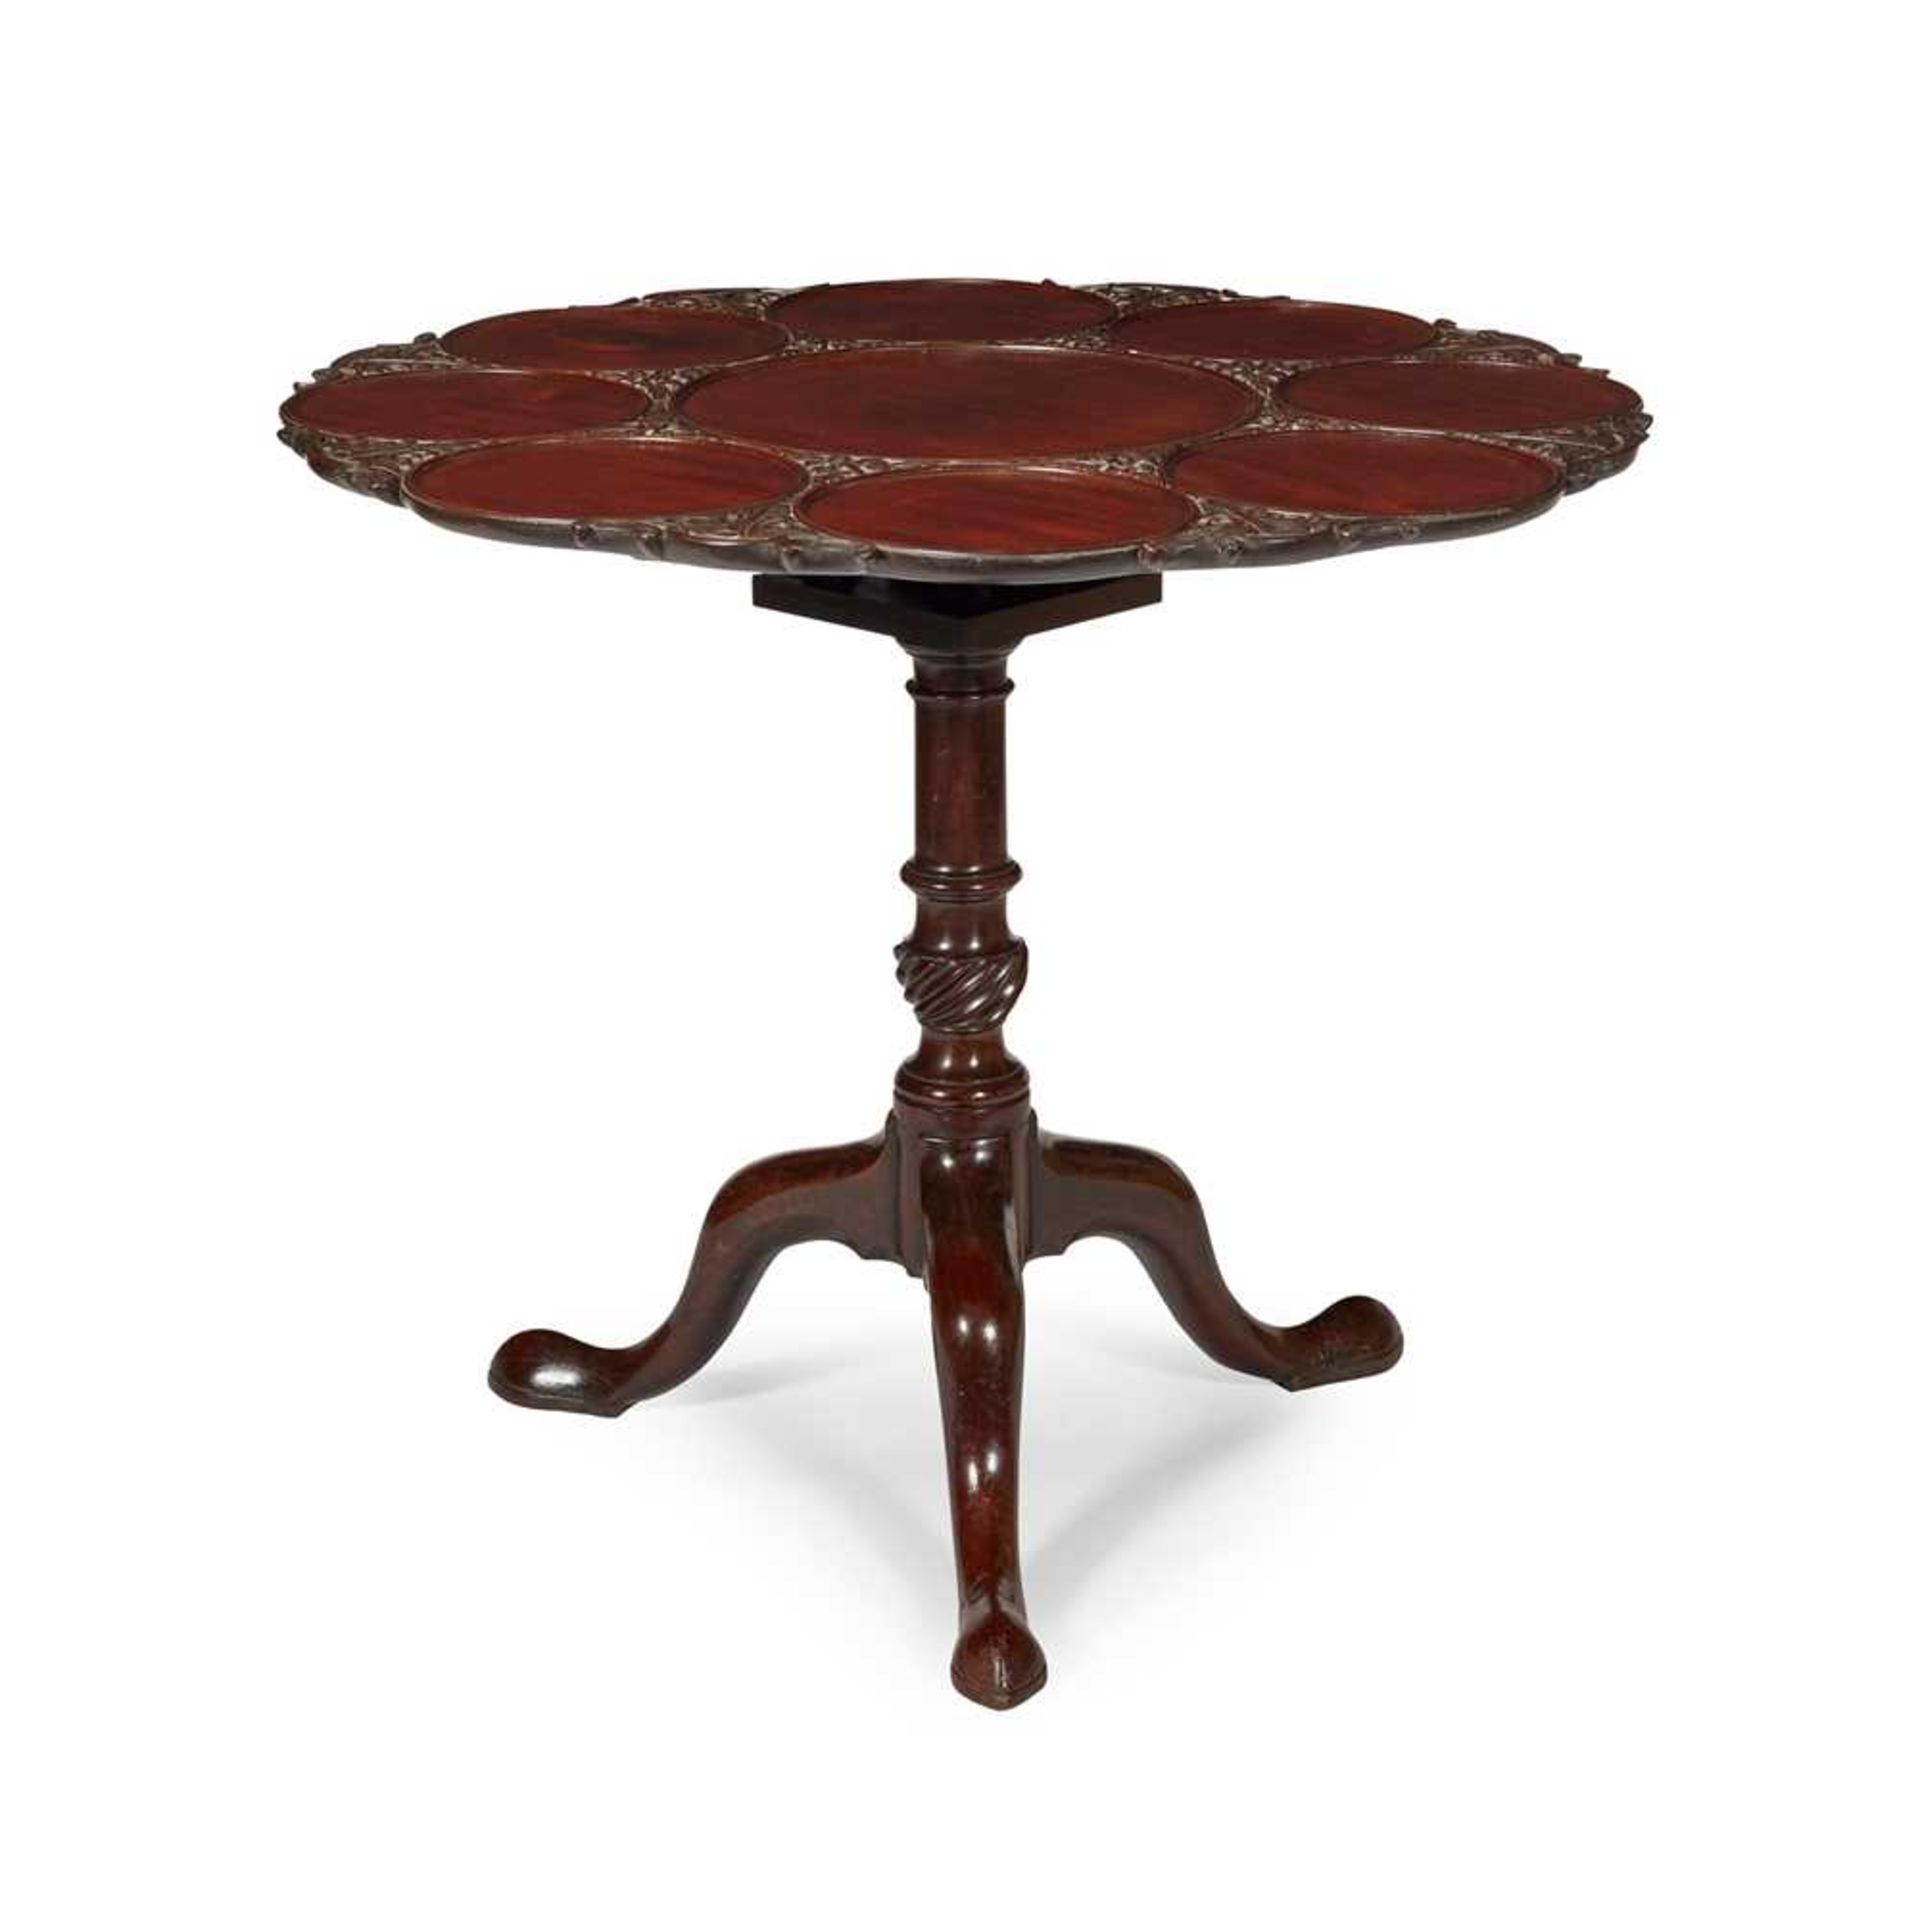 GEORGE III MAHOGANY CARVED BIRDCAGE SUPPER TABLE MID 18TH CENTURY